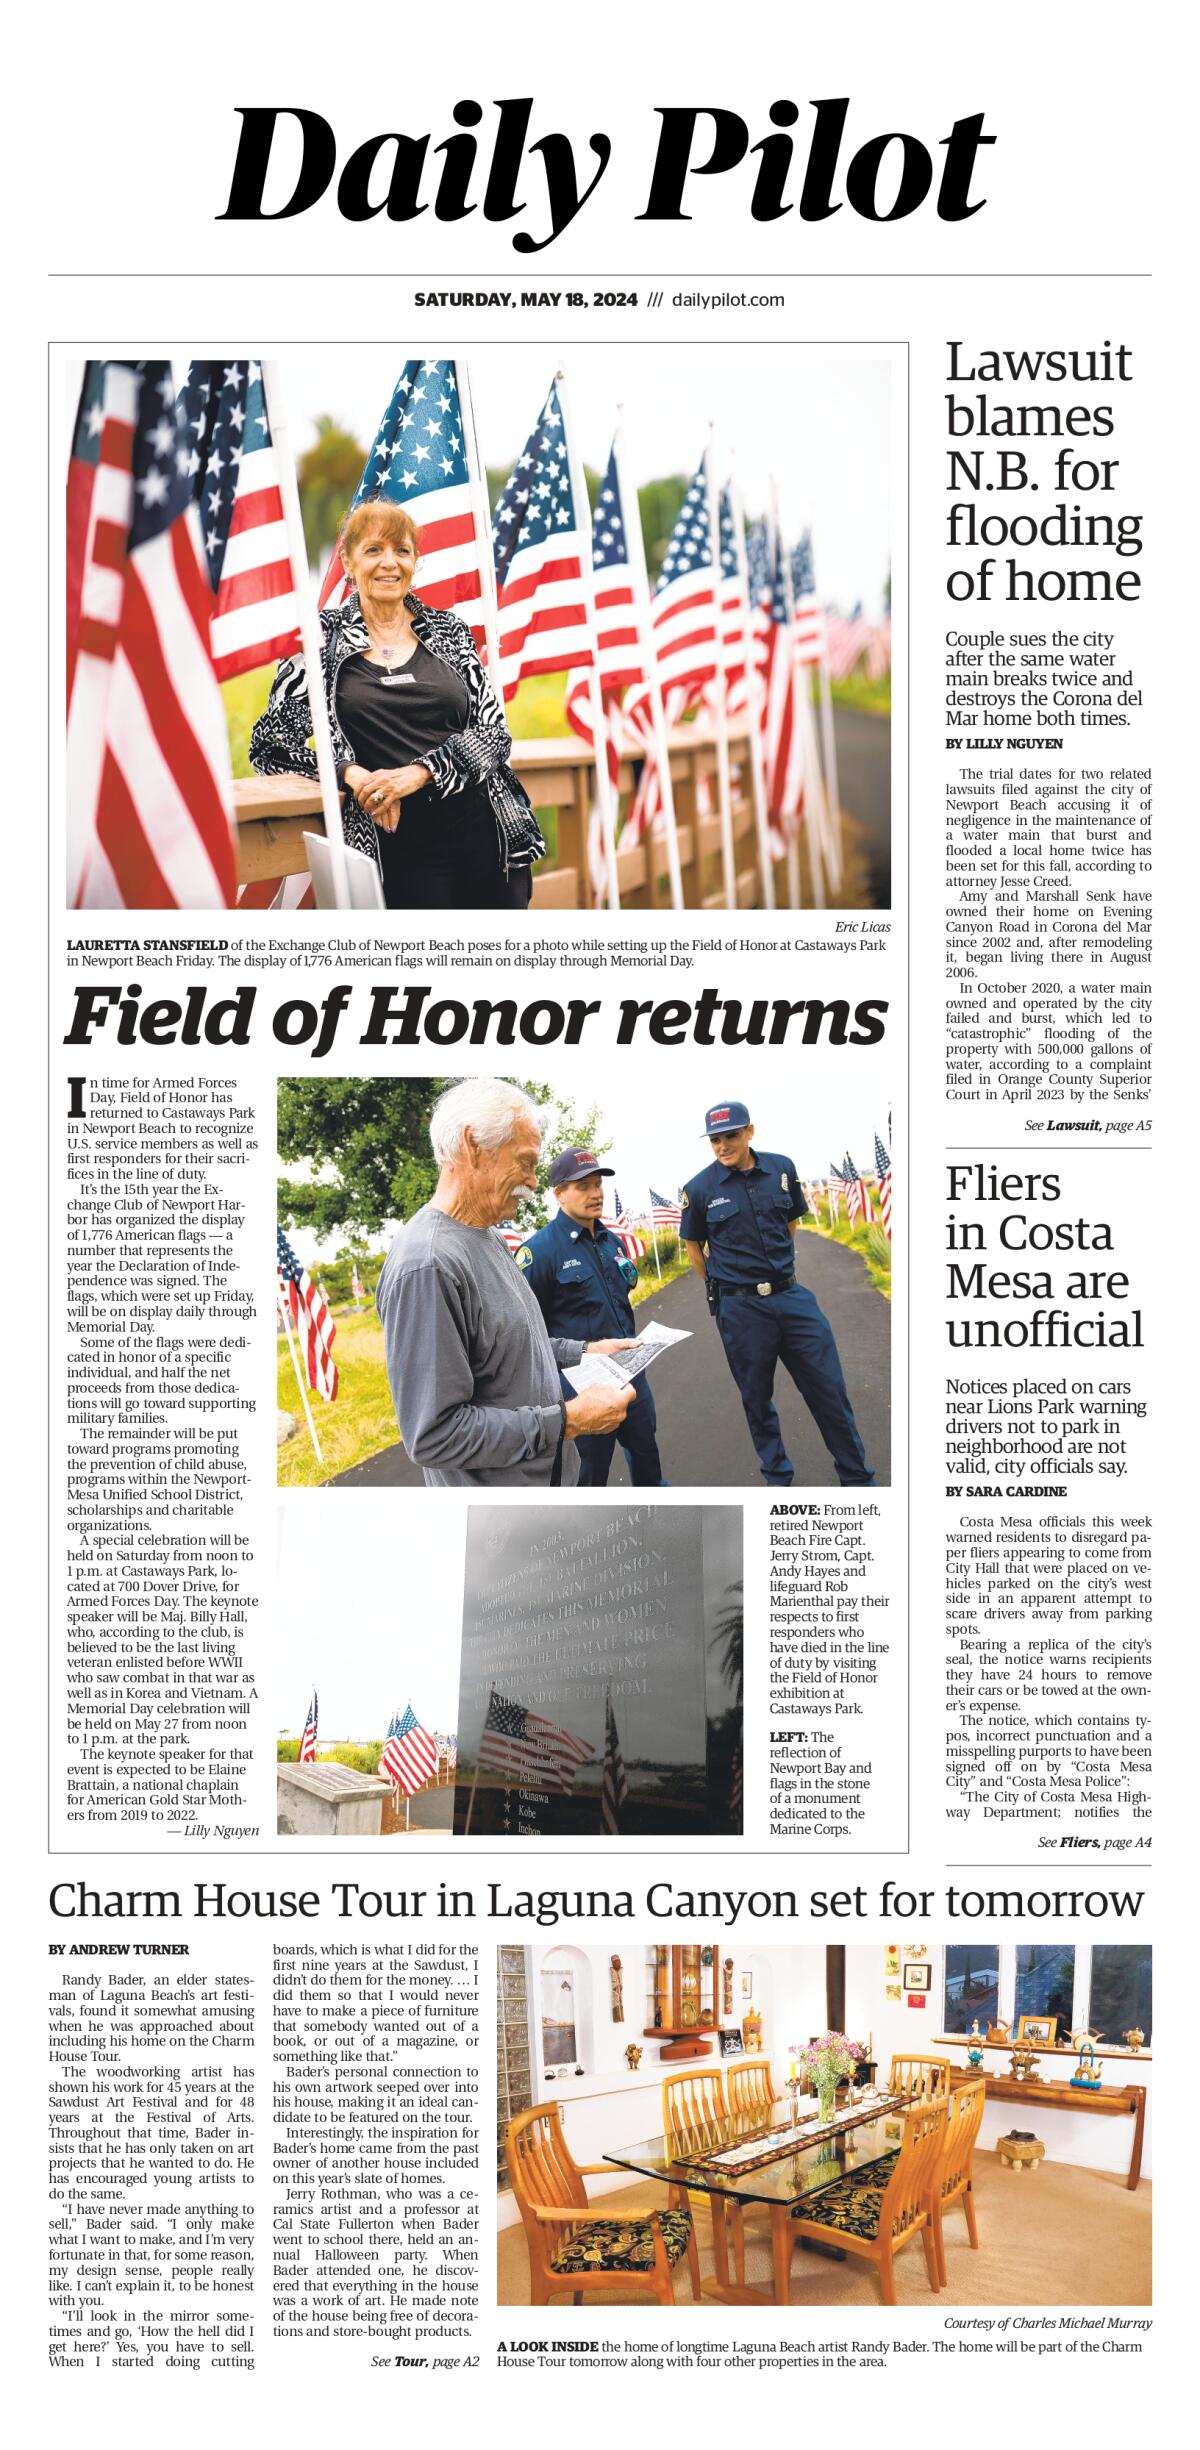 Front page of the Daily Pilot e-newspaper for Saturday, May 18, 2024.